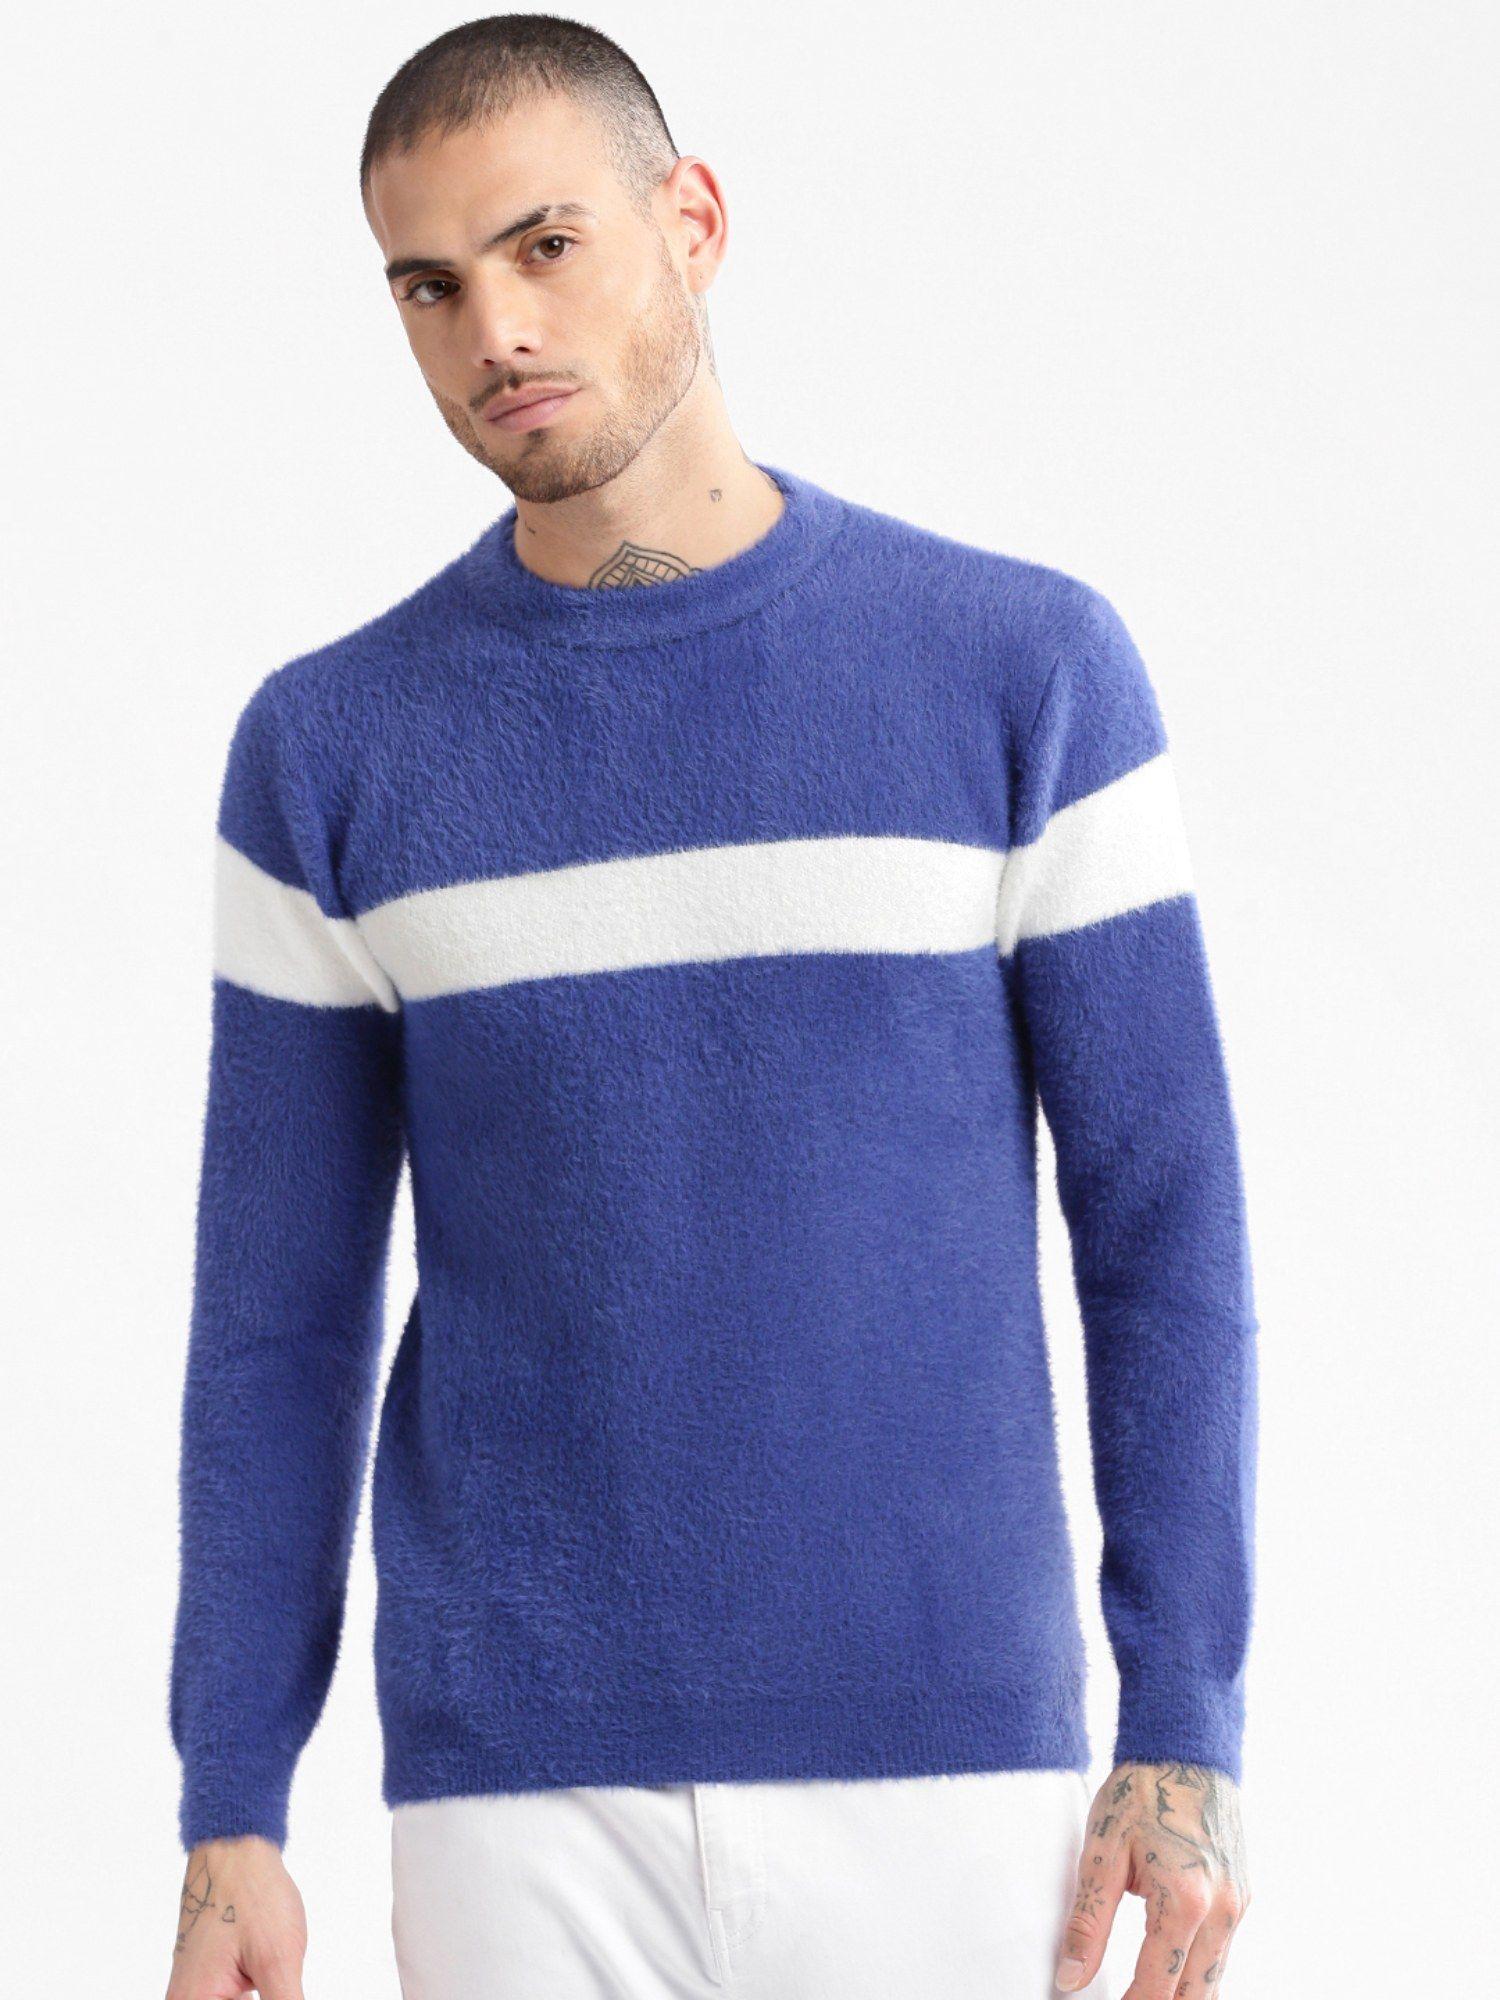 Mens Round Neck Long Sleeves Stripes Blue Pullover